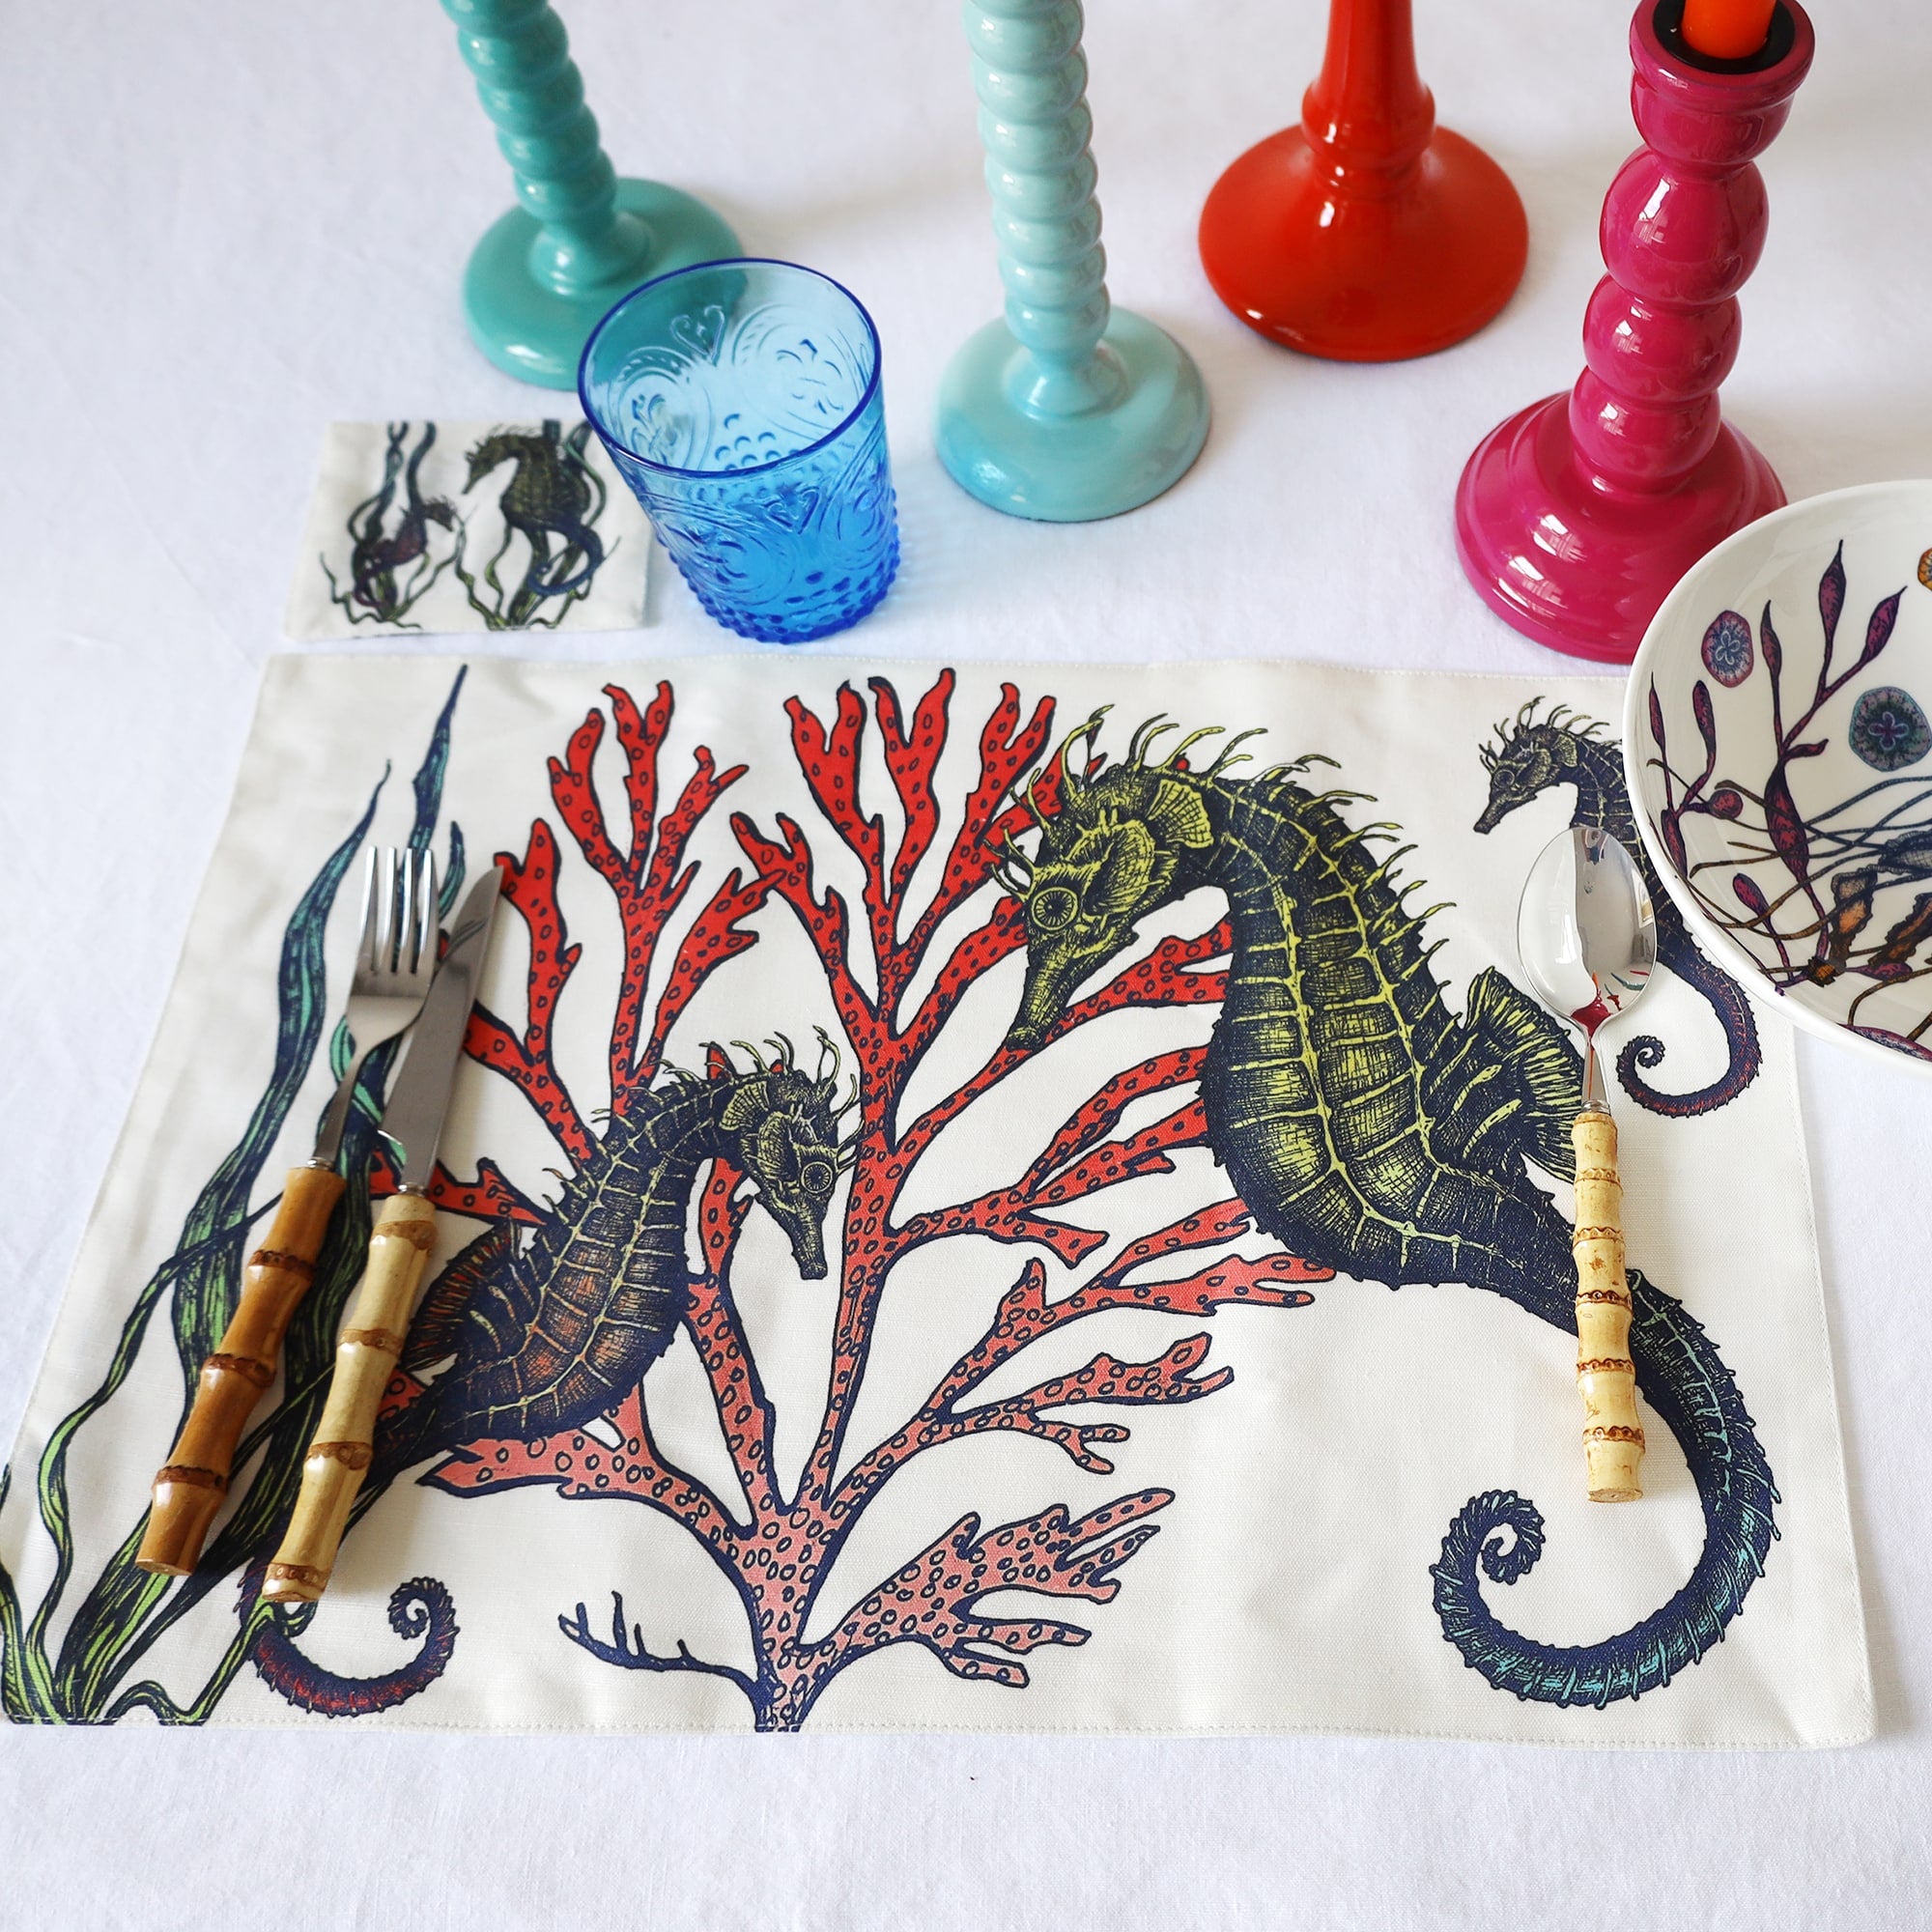 Fabric coaster in our Reef design showing two seahorses placed next to a matching placemat on a tablecloth.Also you can see bamboo cutlery.Behind are several coloured candle holders and a glass